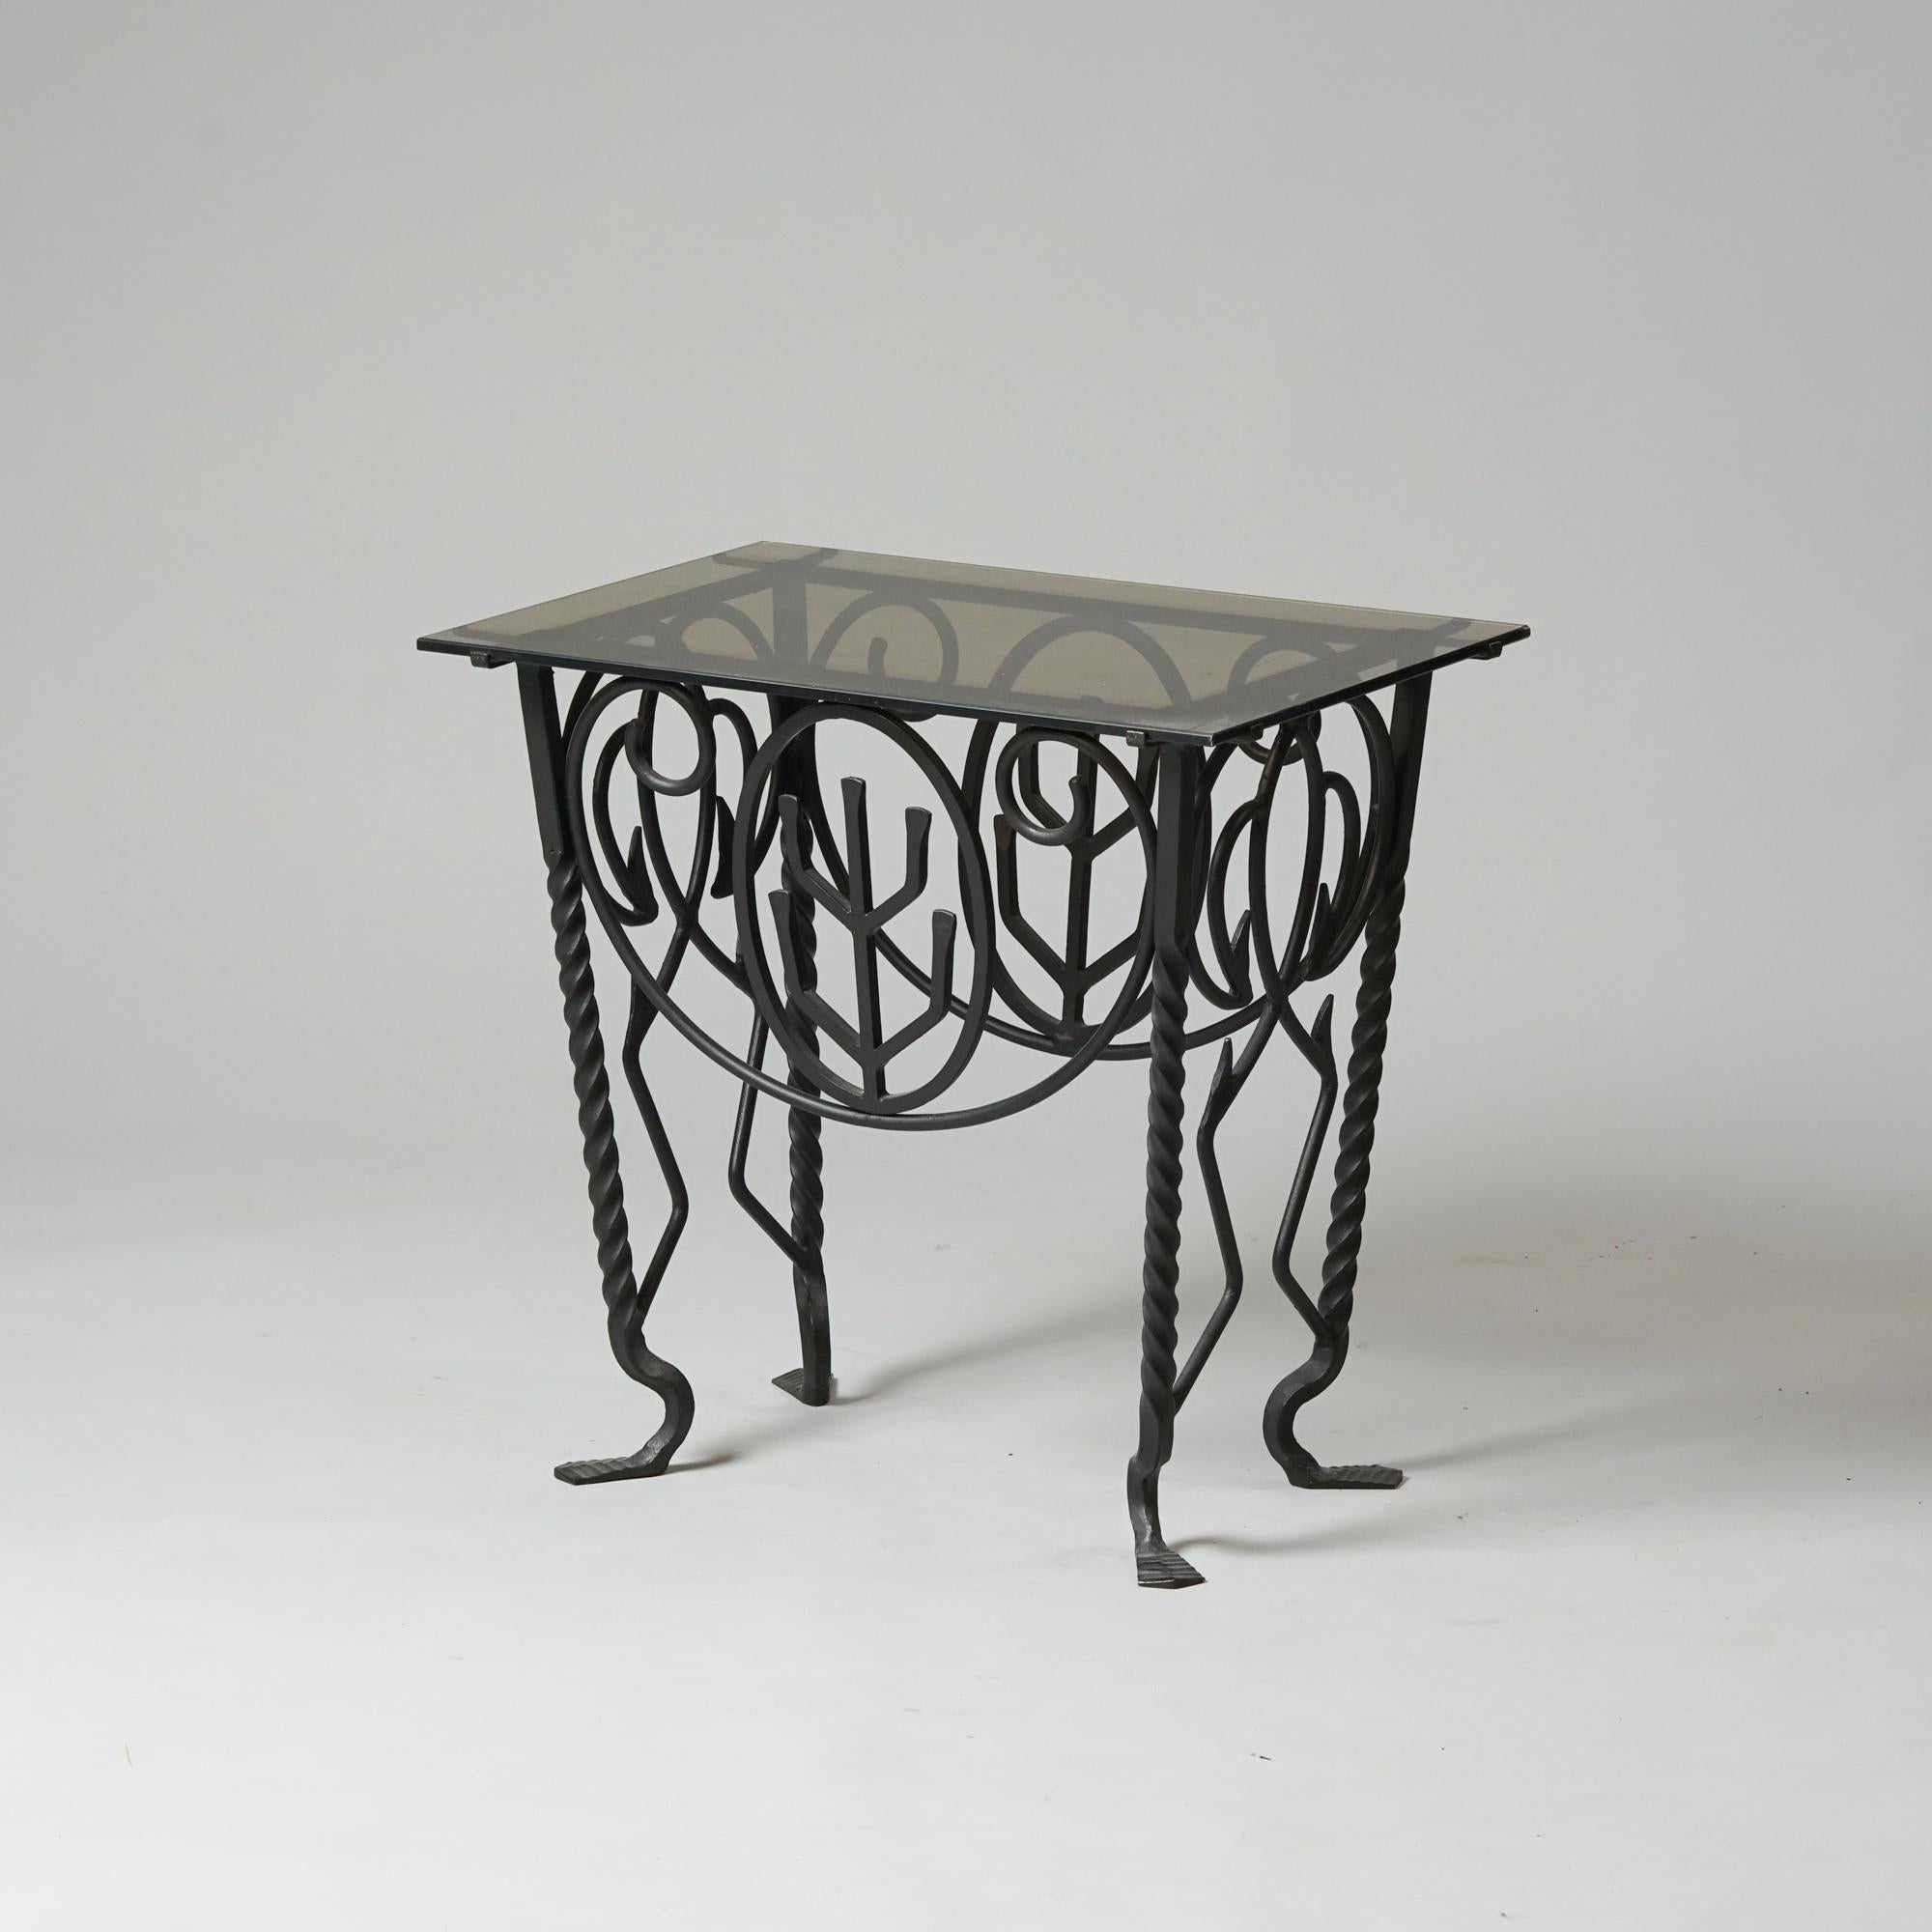 Exceedingly rare iron table by Taidetakomo Hakkarainen from the Early 20th Century. Forged iron frame with glass table top. Good vintage condition, minor patina and wear consistent with age and use. 